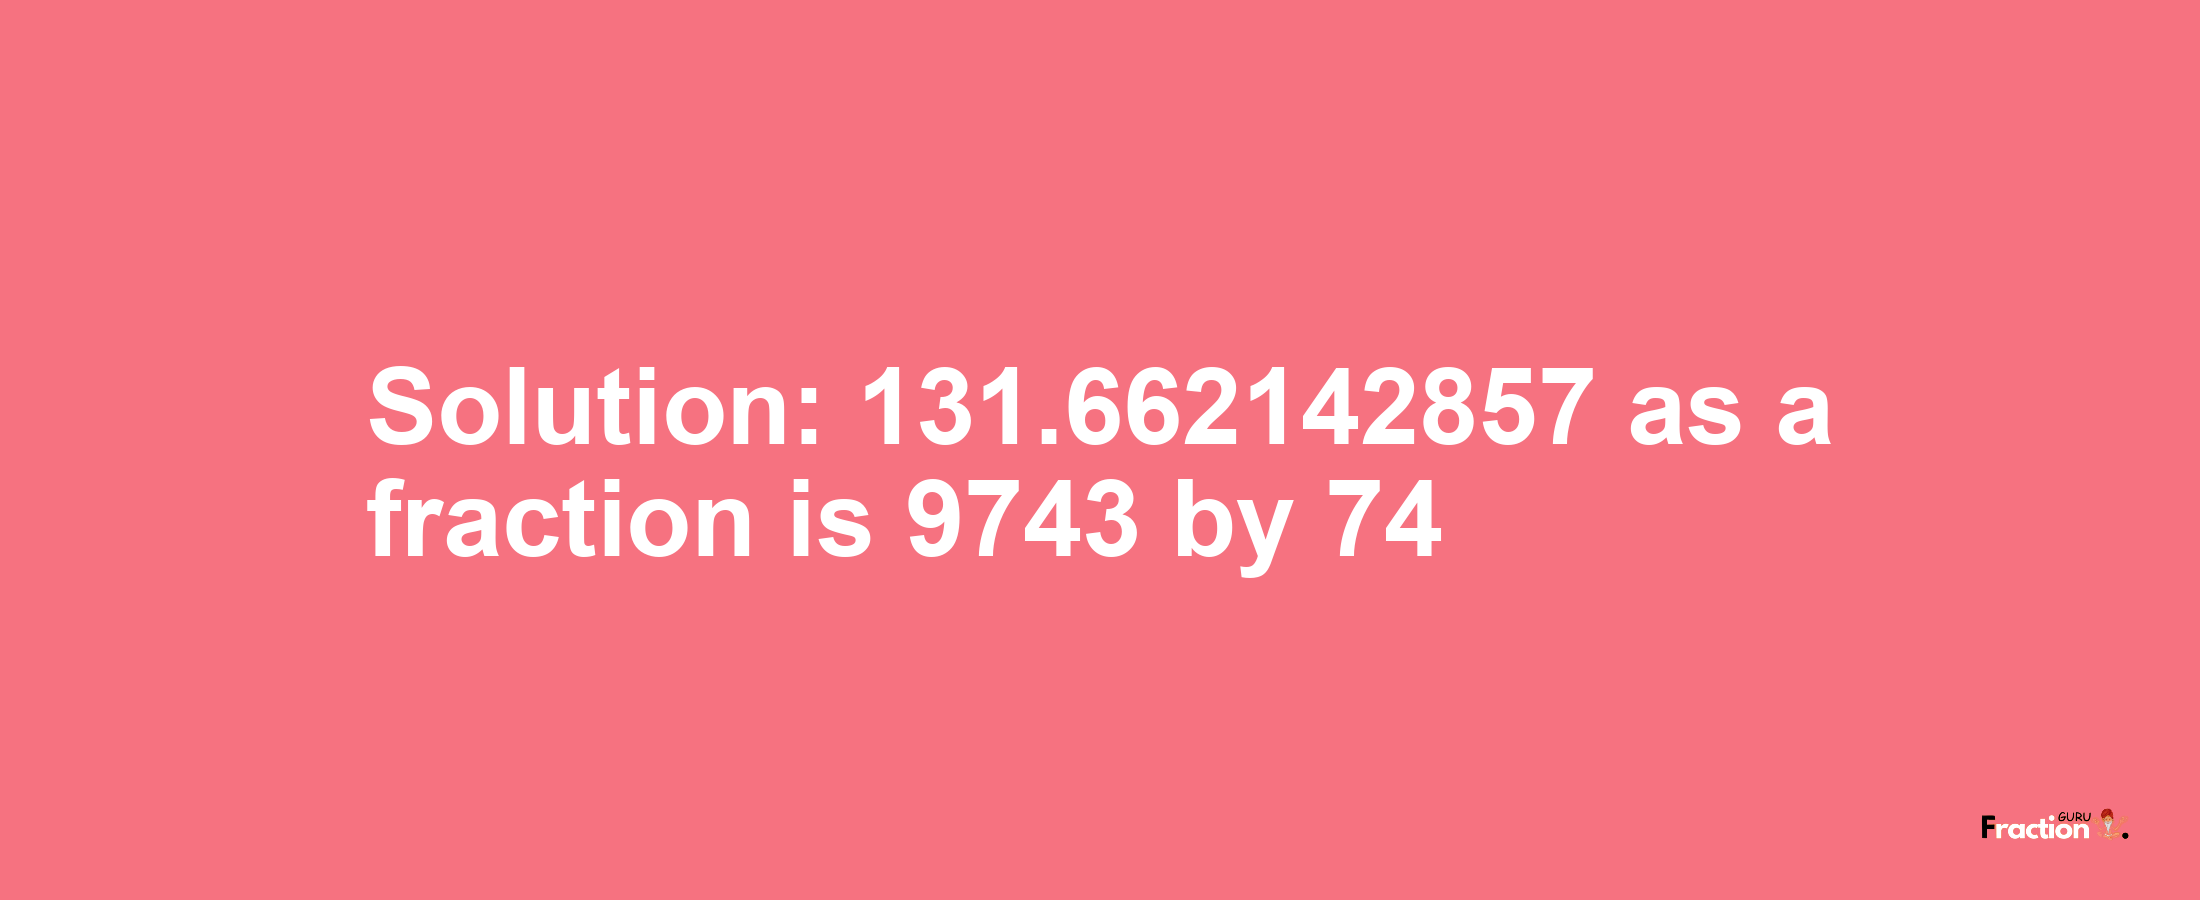 Solution:131.662142857 as a fraction is 9743/74